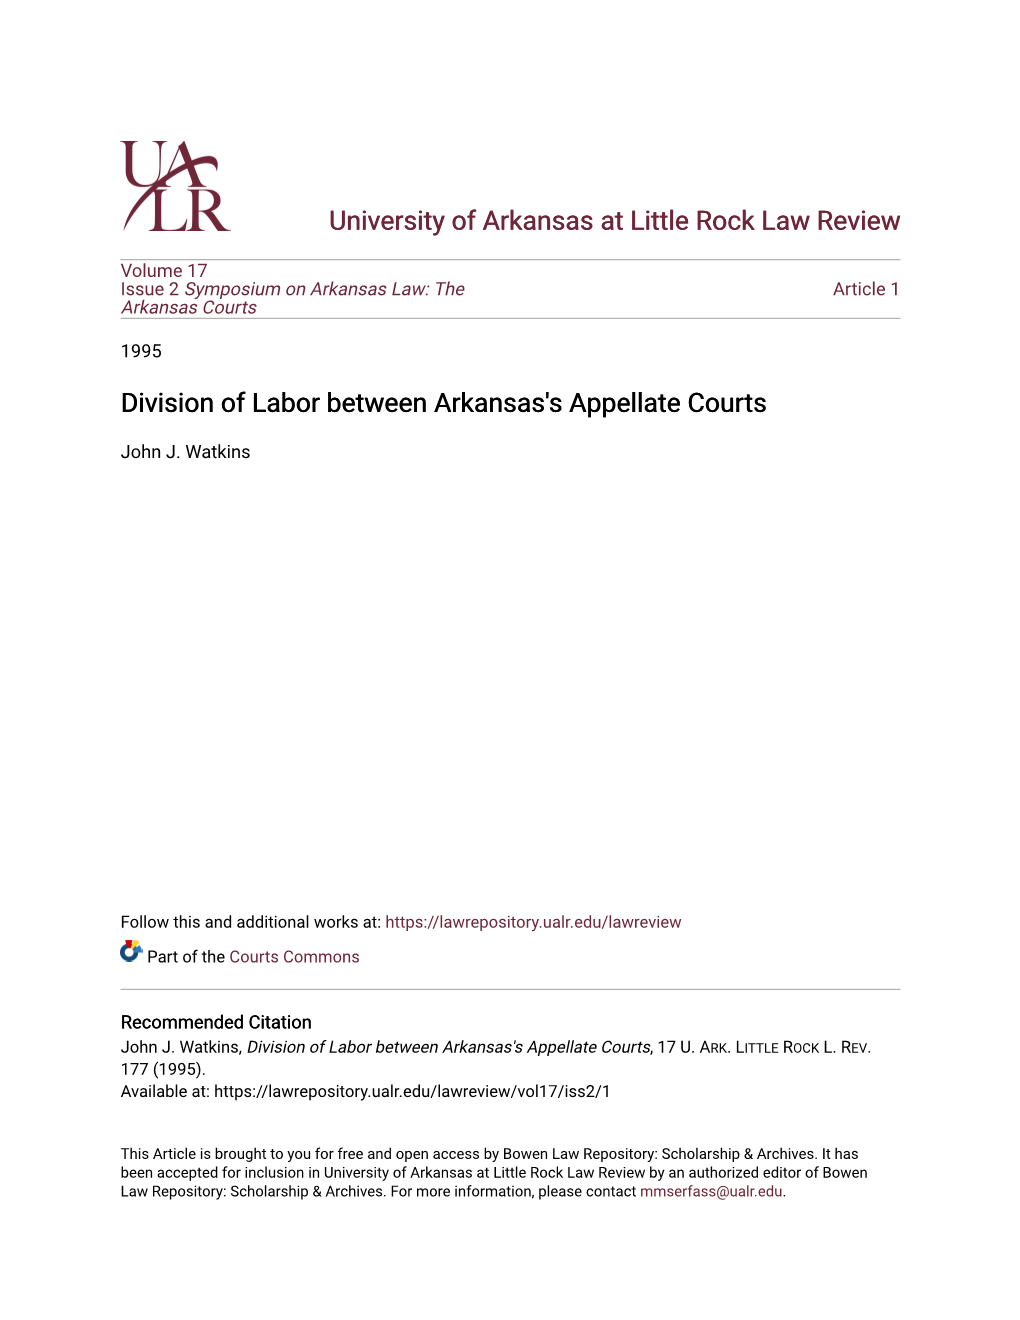 Division of Labor Between Arkansas's Appellate Courts